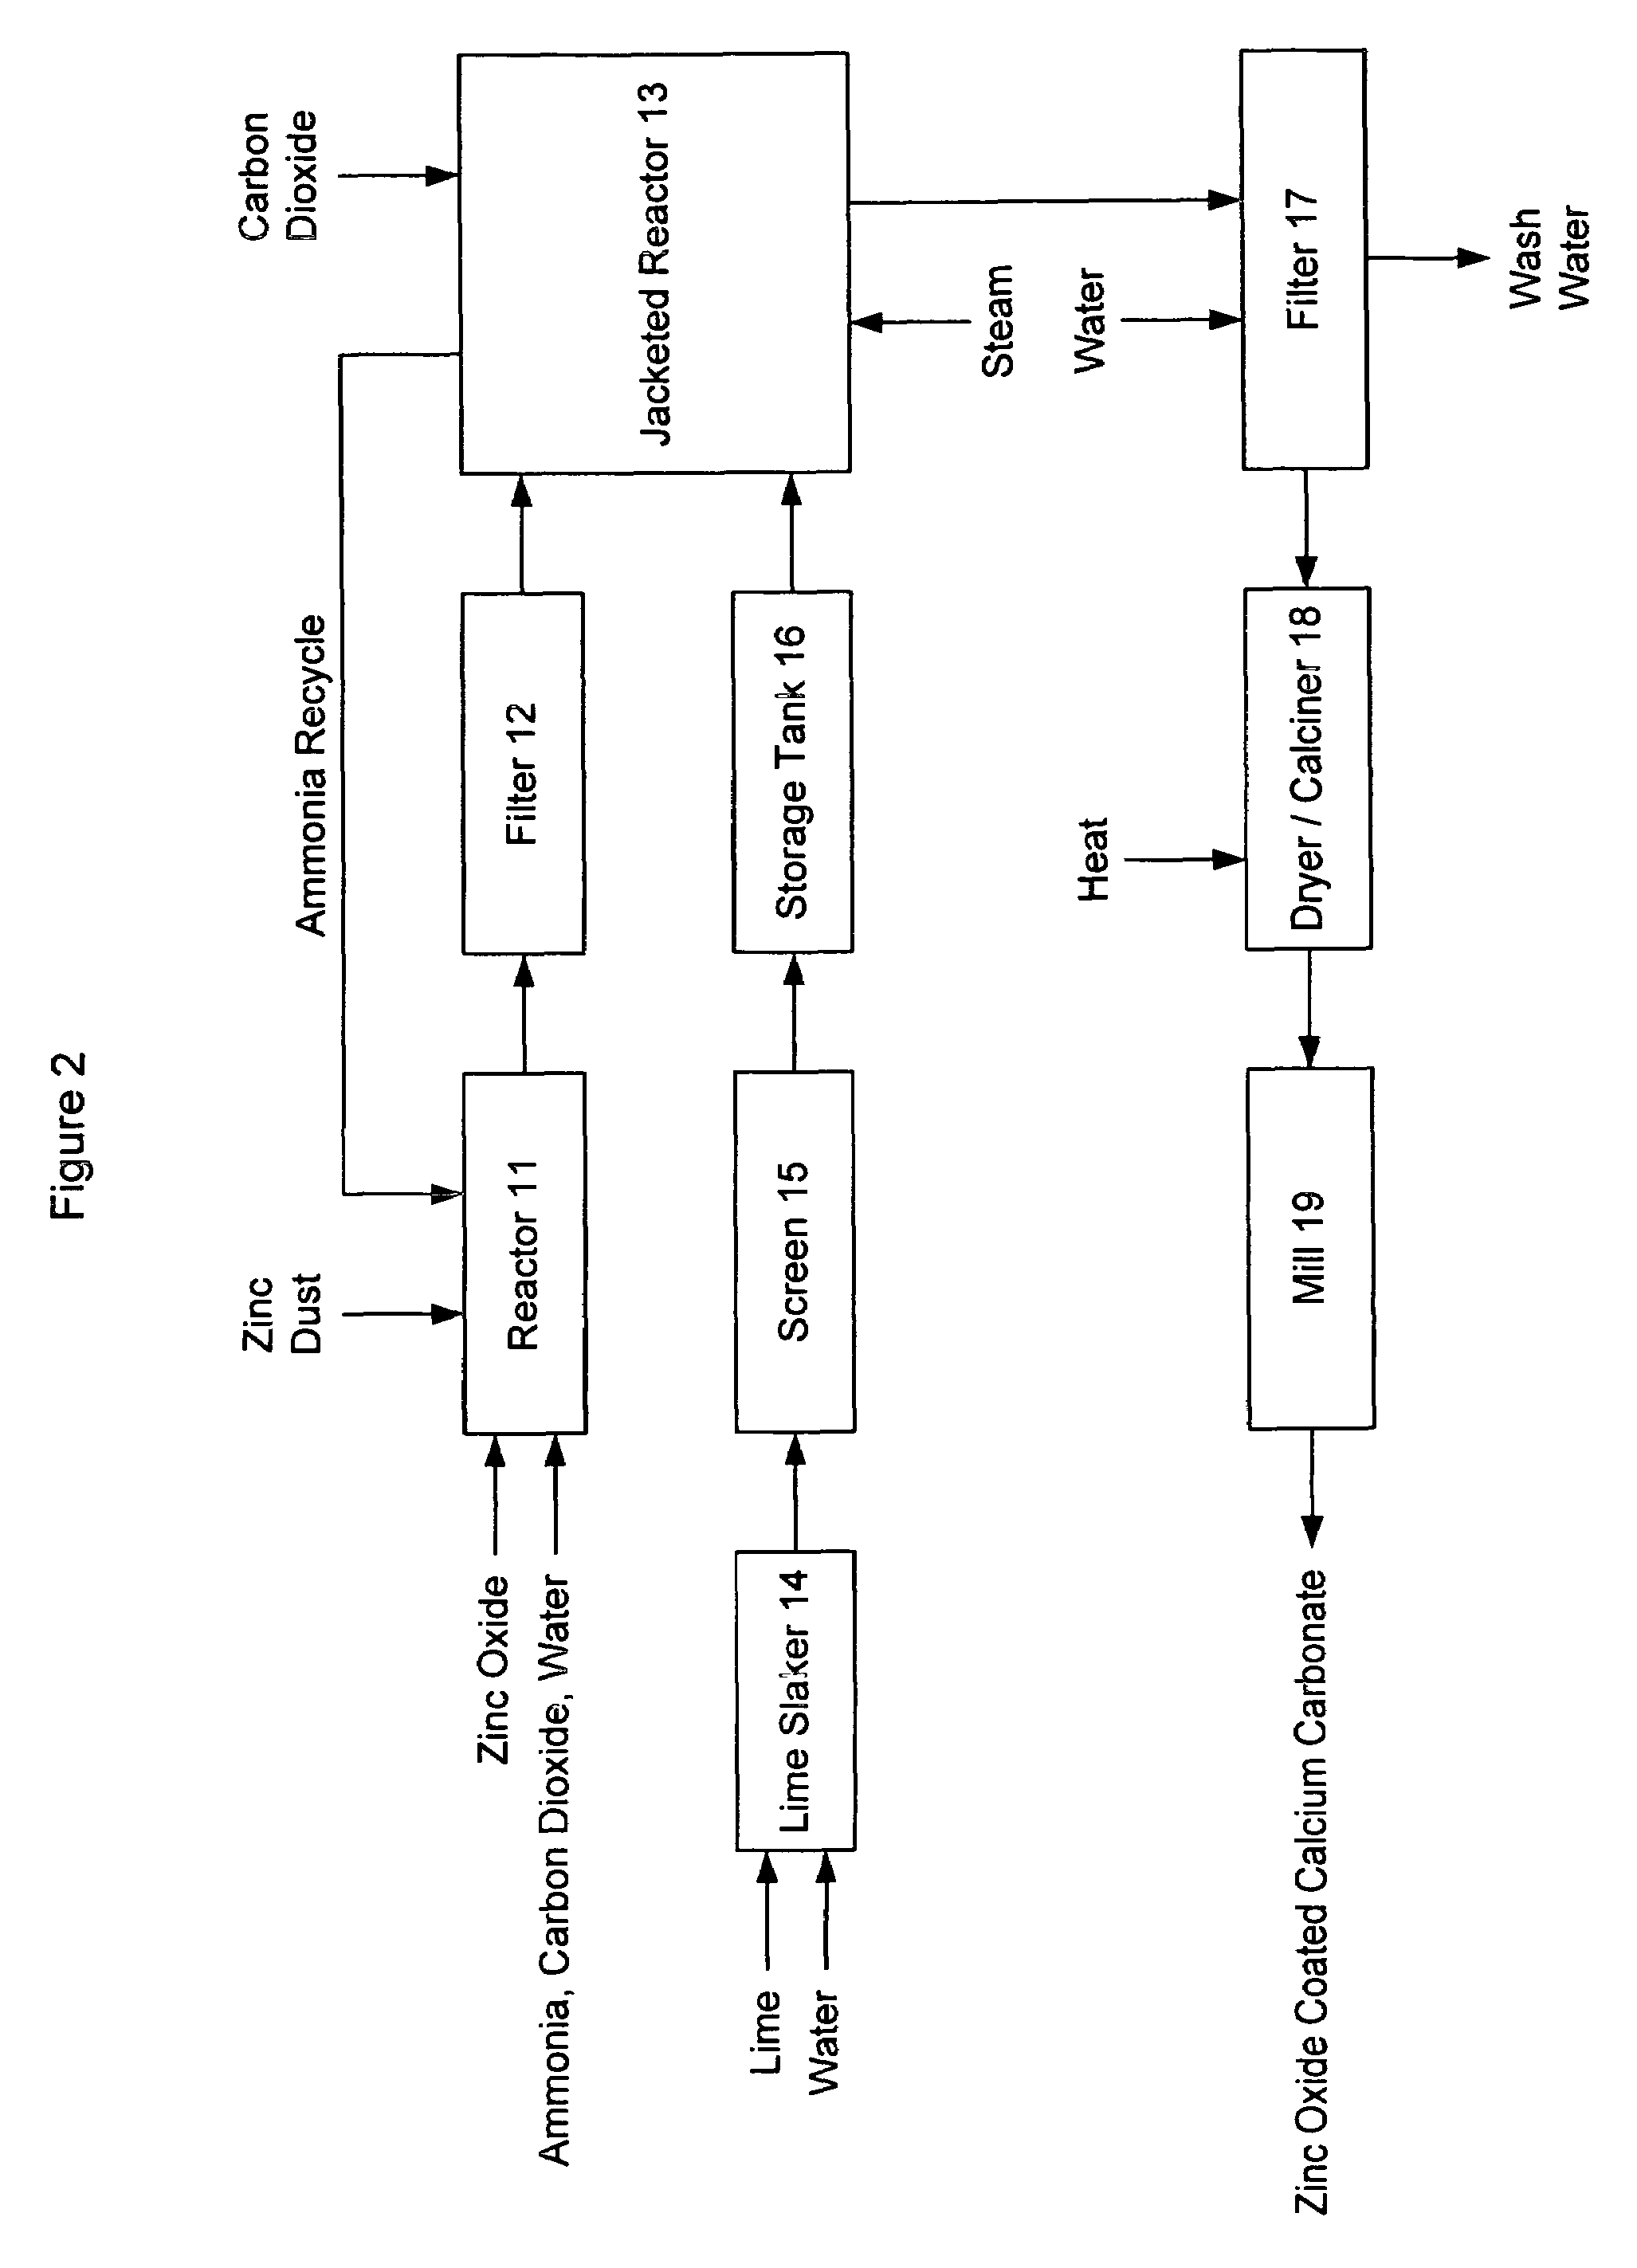 Zinc oxide coated particles, compositions containing the same, and methods for making the same